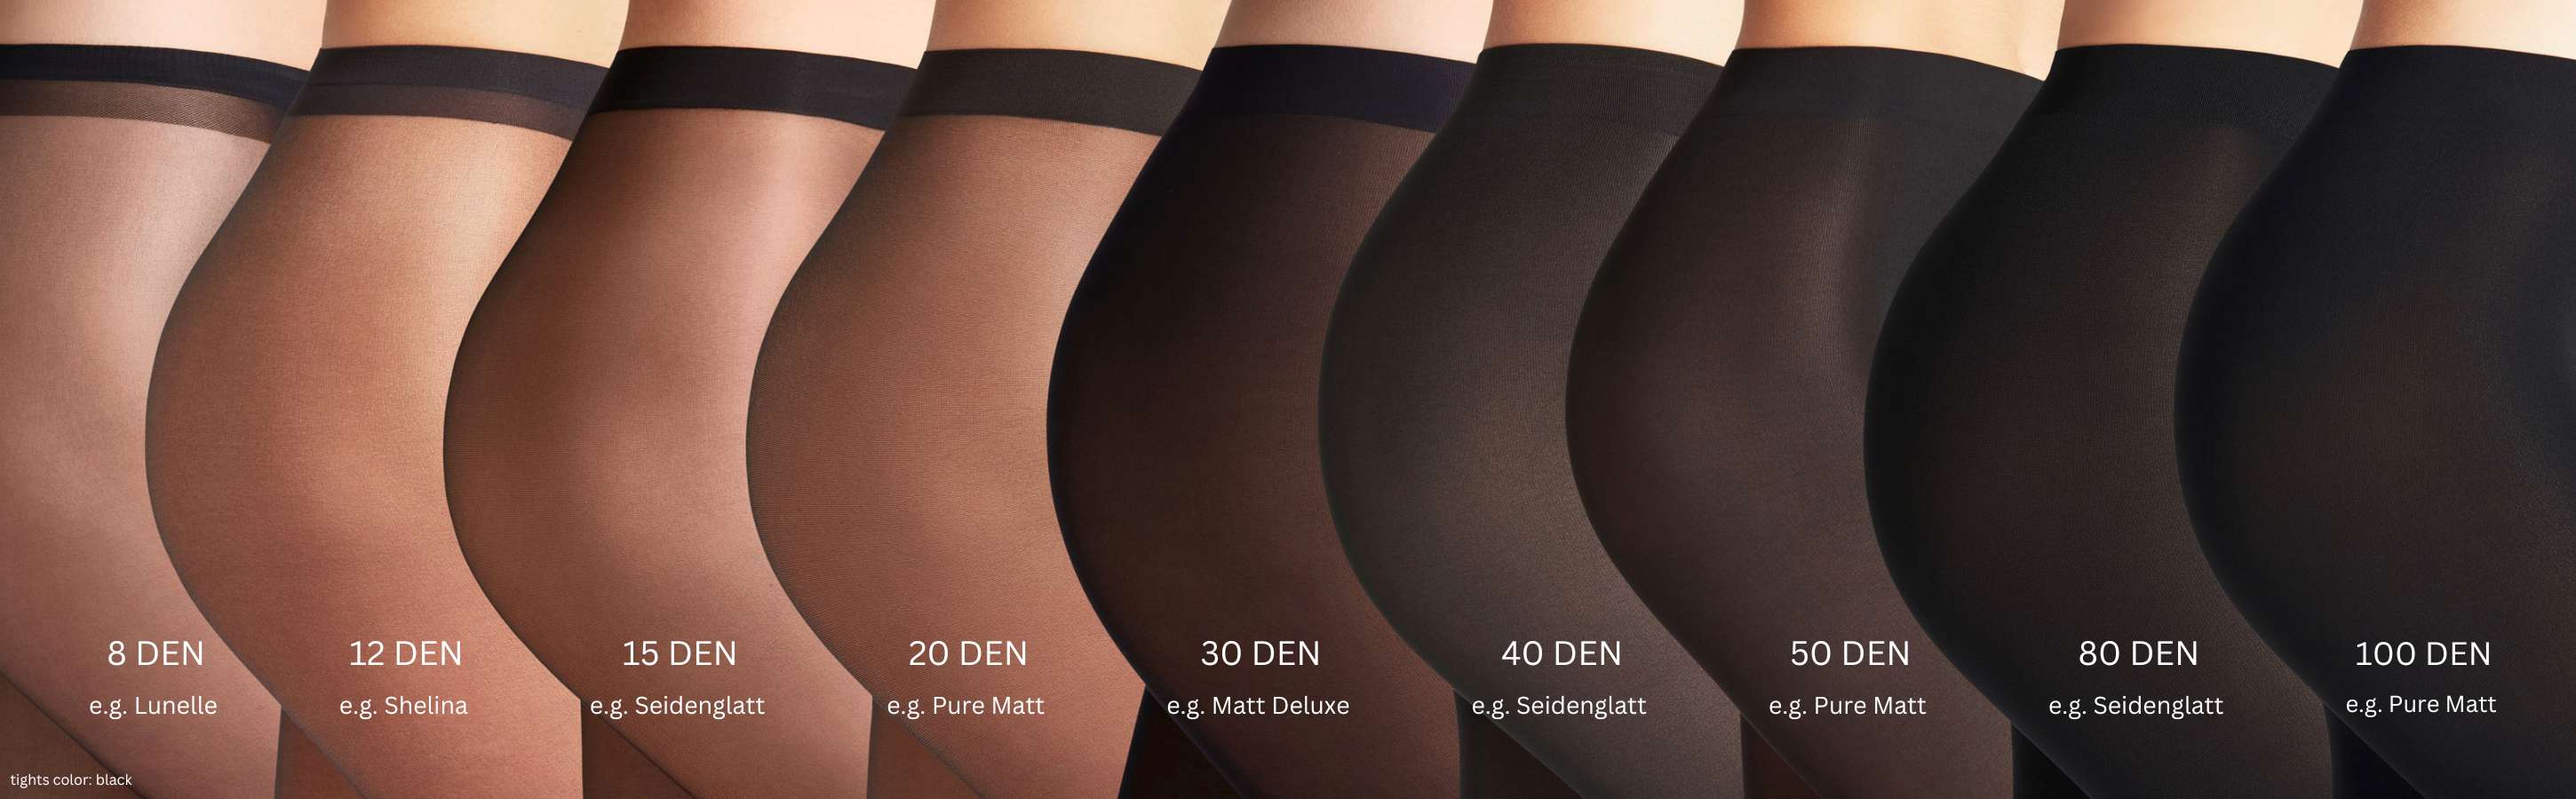 Women's Cotton Hosiery guide and information resource about